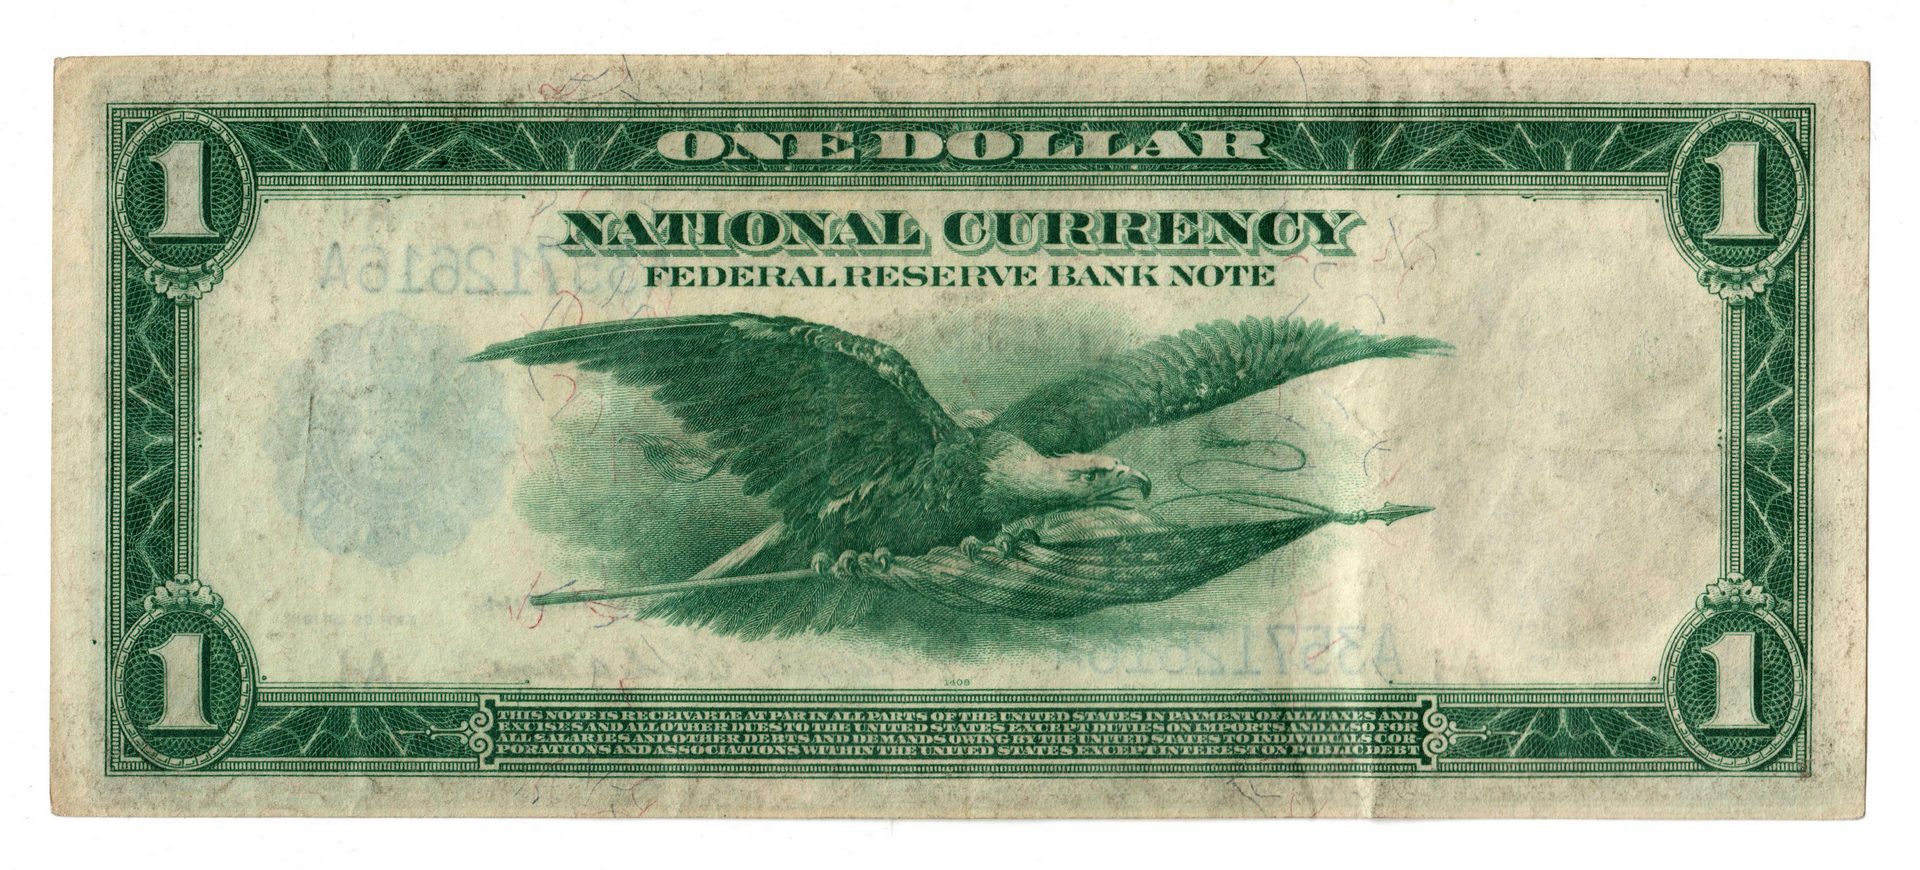 Lot 106: Northern Pair; $1 Blue Seal National Currency Note